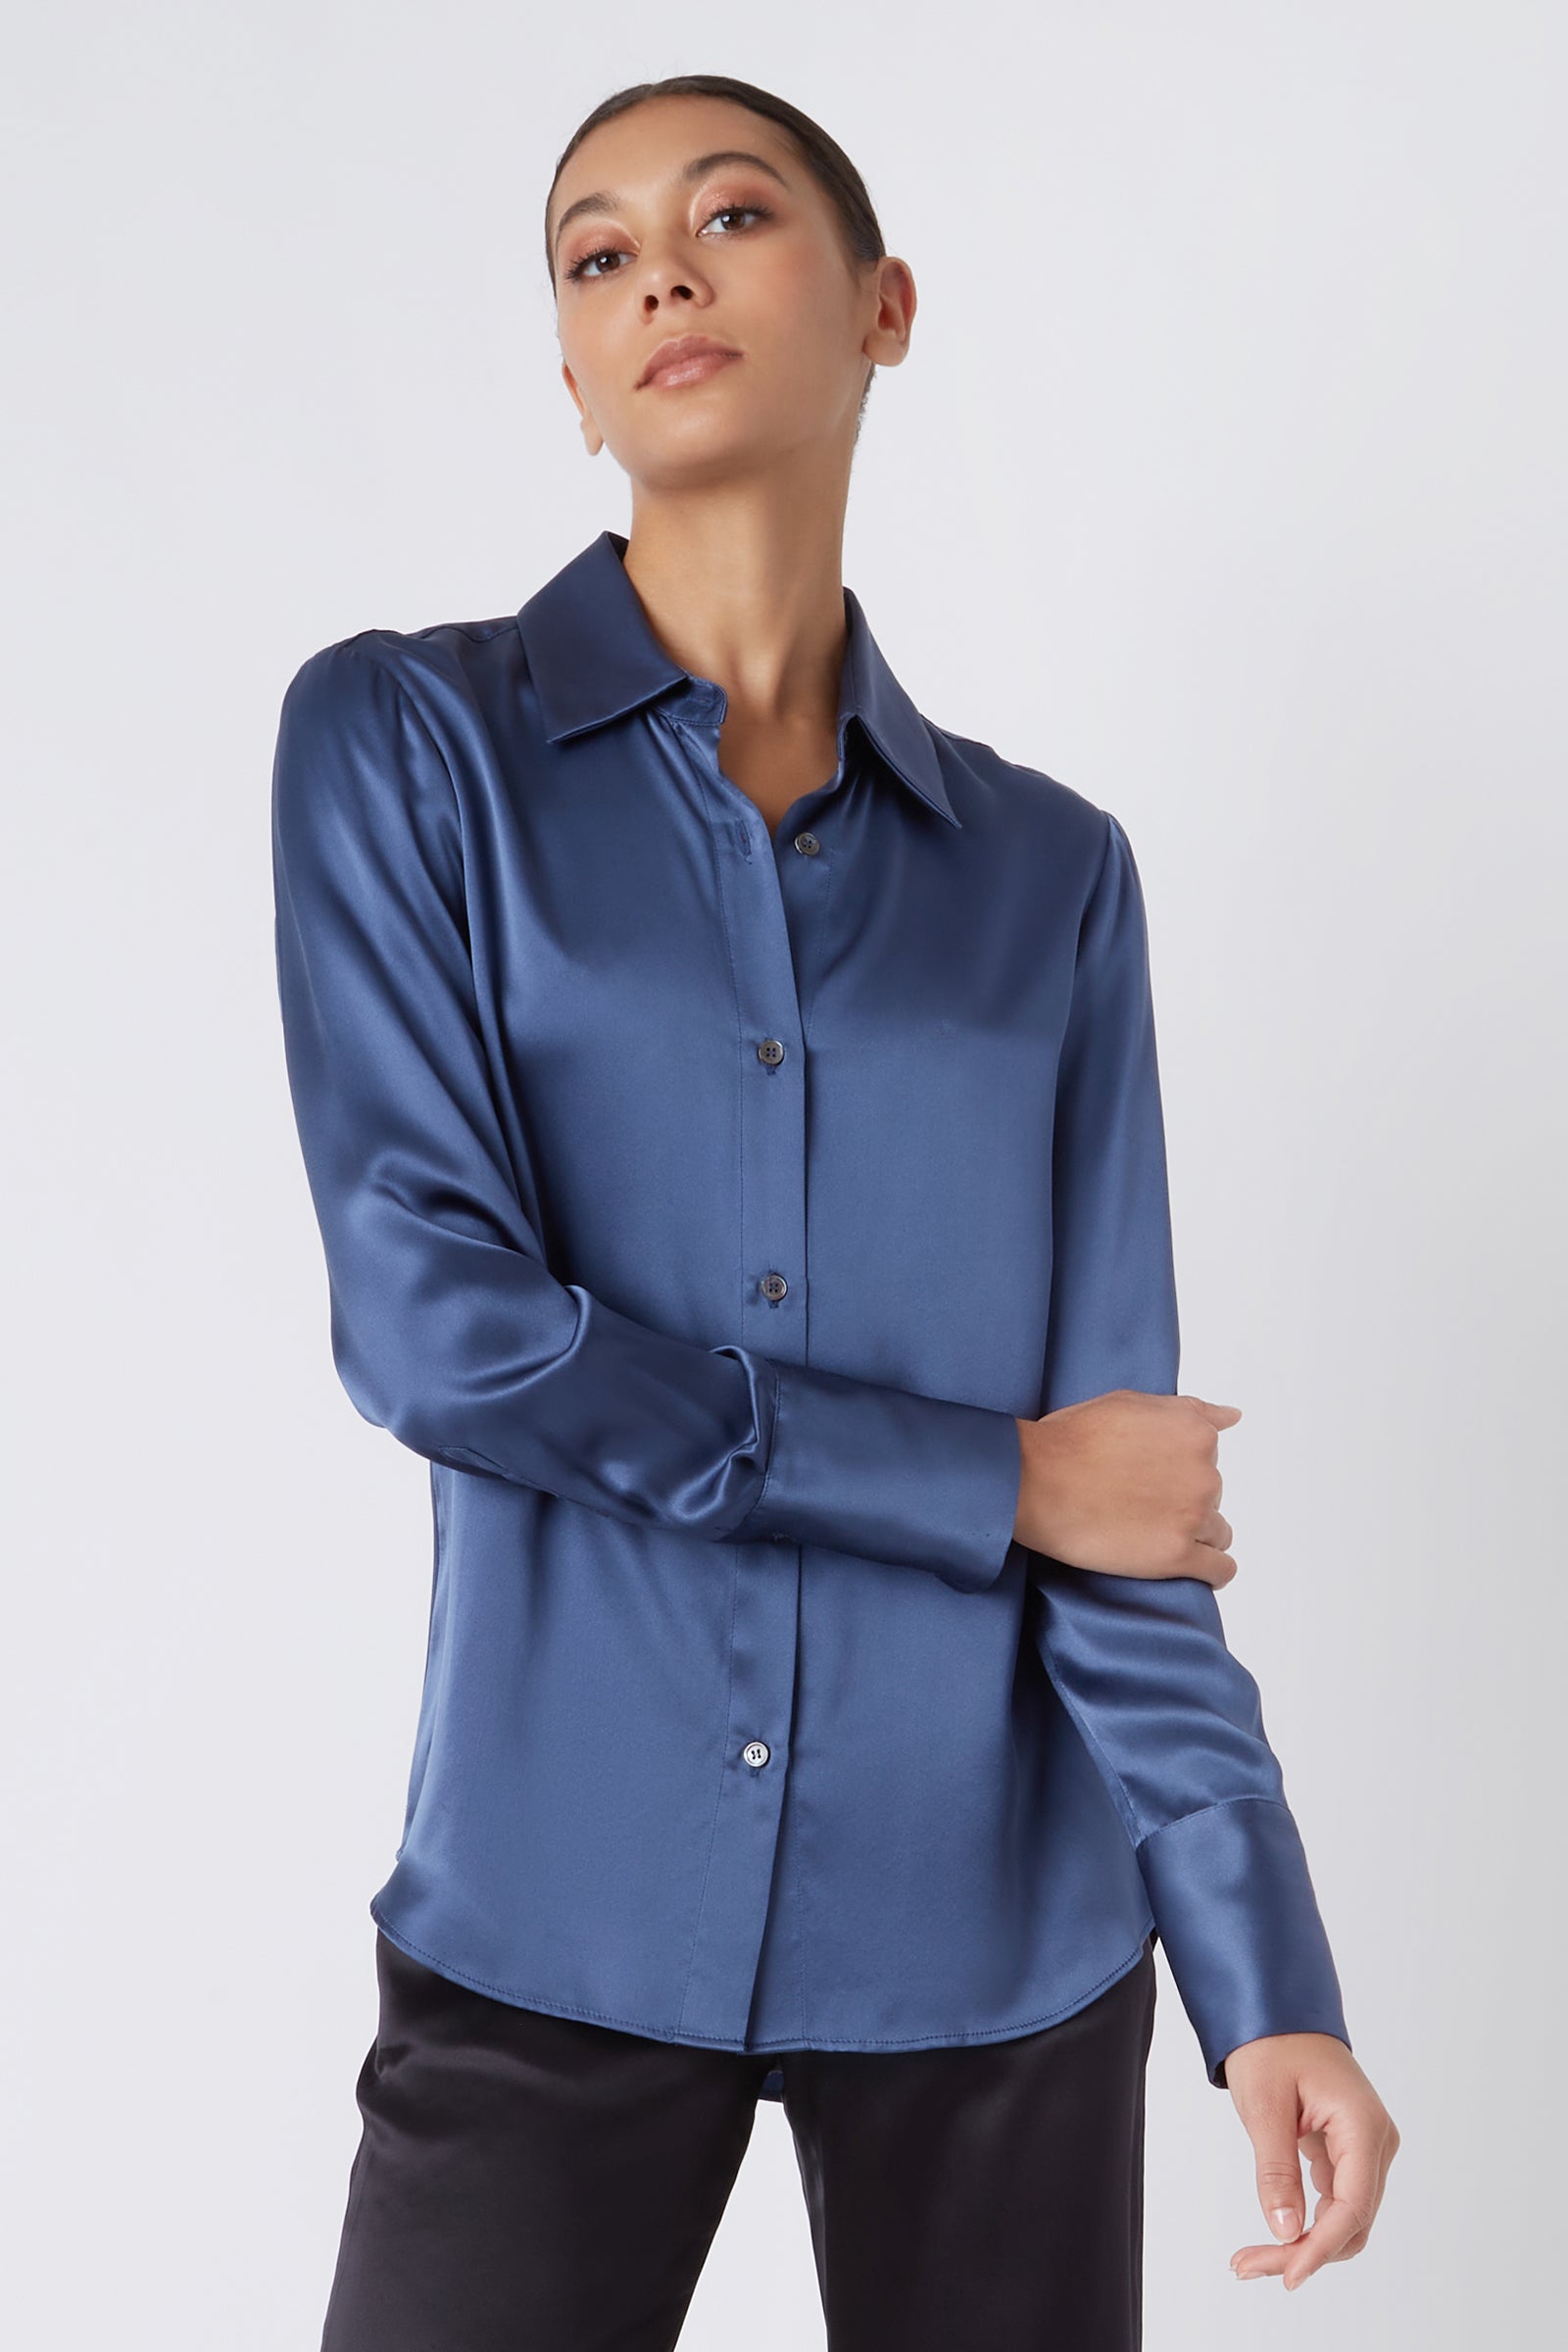 Kal Rieman Classic Tailored Blouse in Dusty Blue Silk on Model Head Tilted Up Cropped Front View